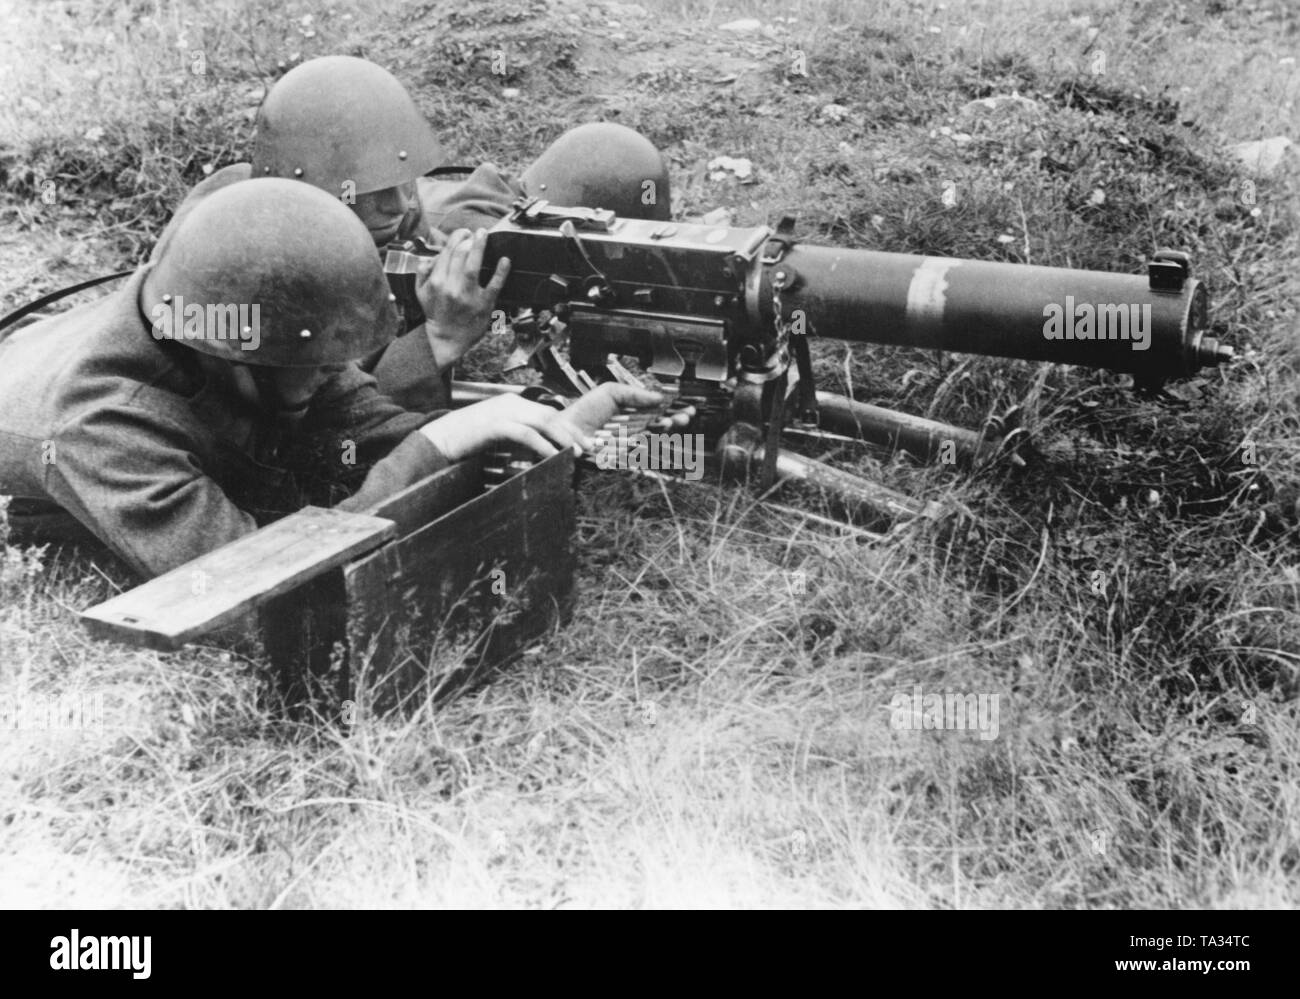 Soldiers of the Czechoslovak army with heavy machine guns. Stock Photo